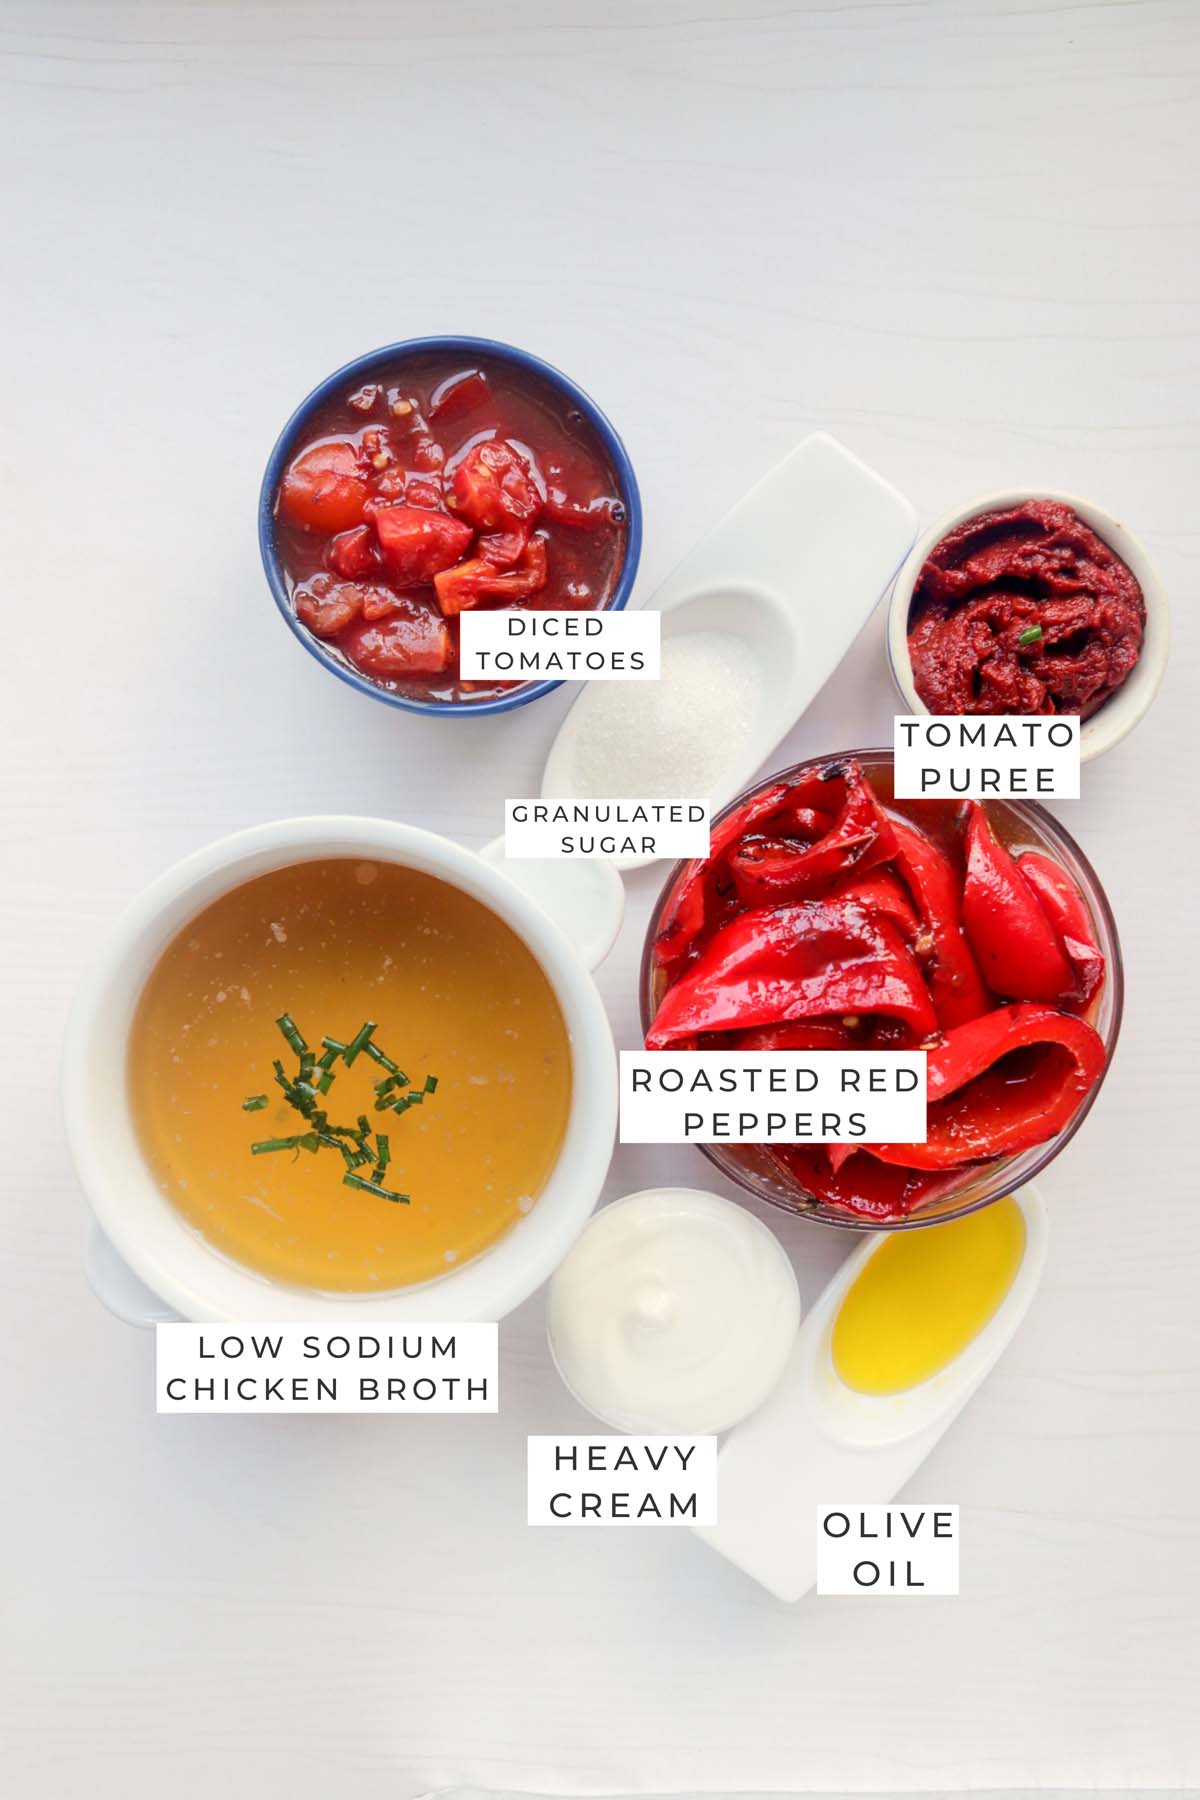 Labeled ingredients for the tomato soup.